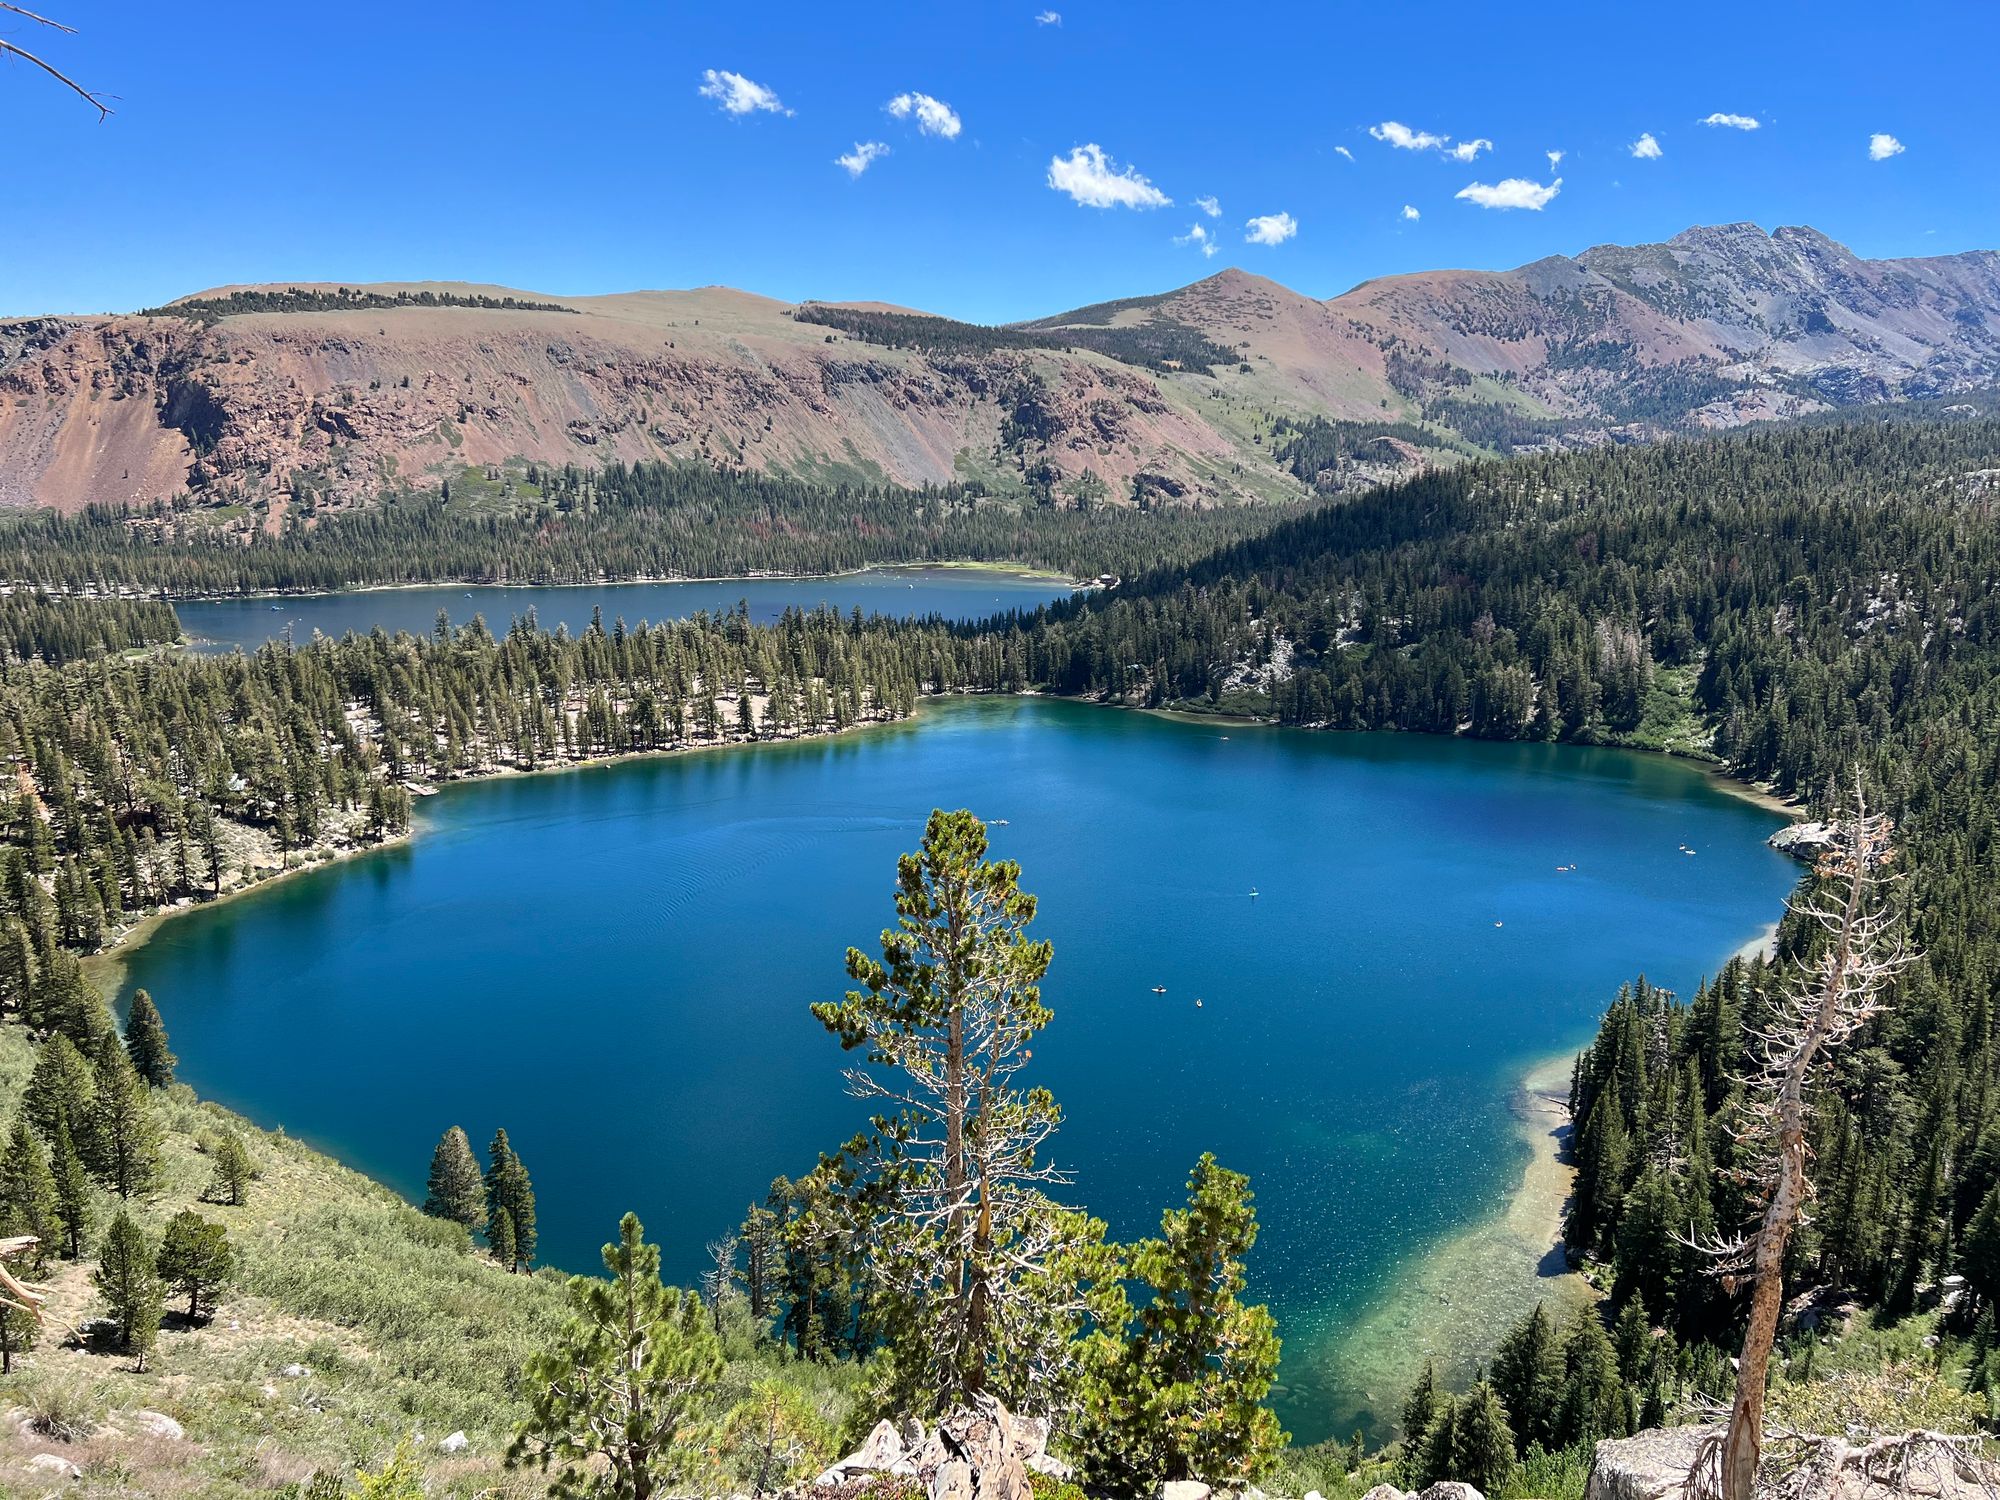 Two blue alpine lakes separated by a thin strip of forested land.